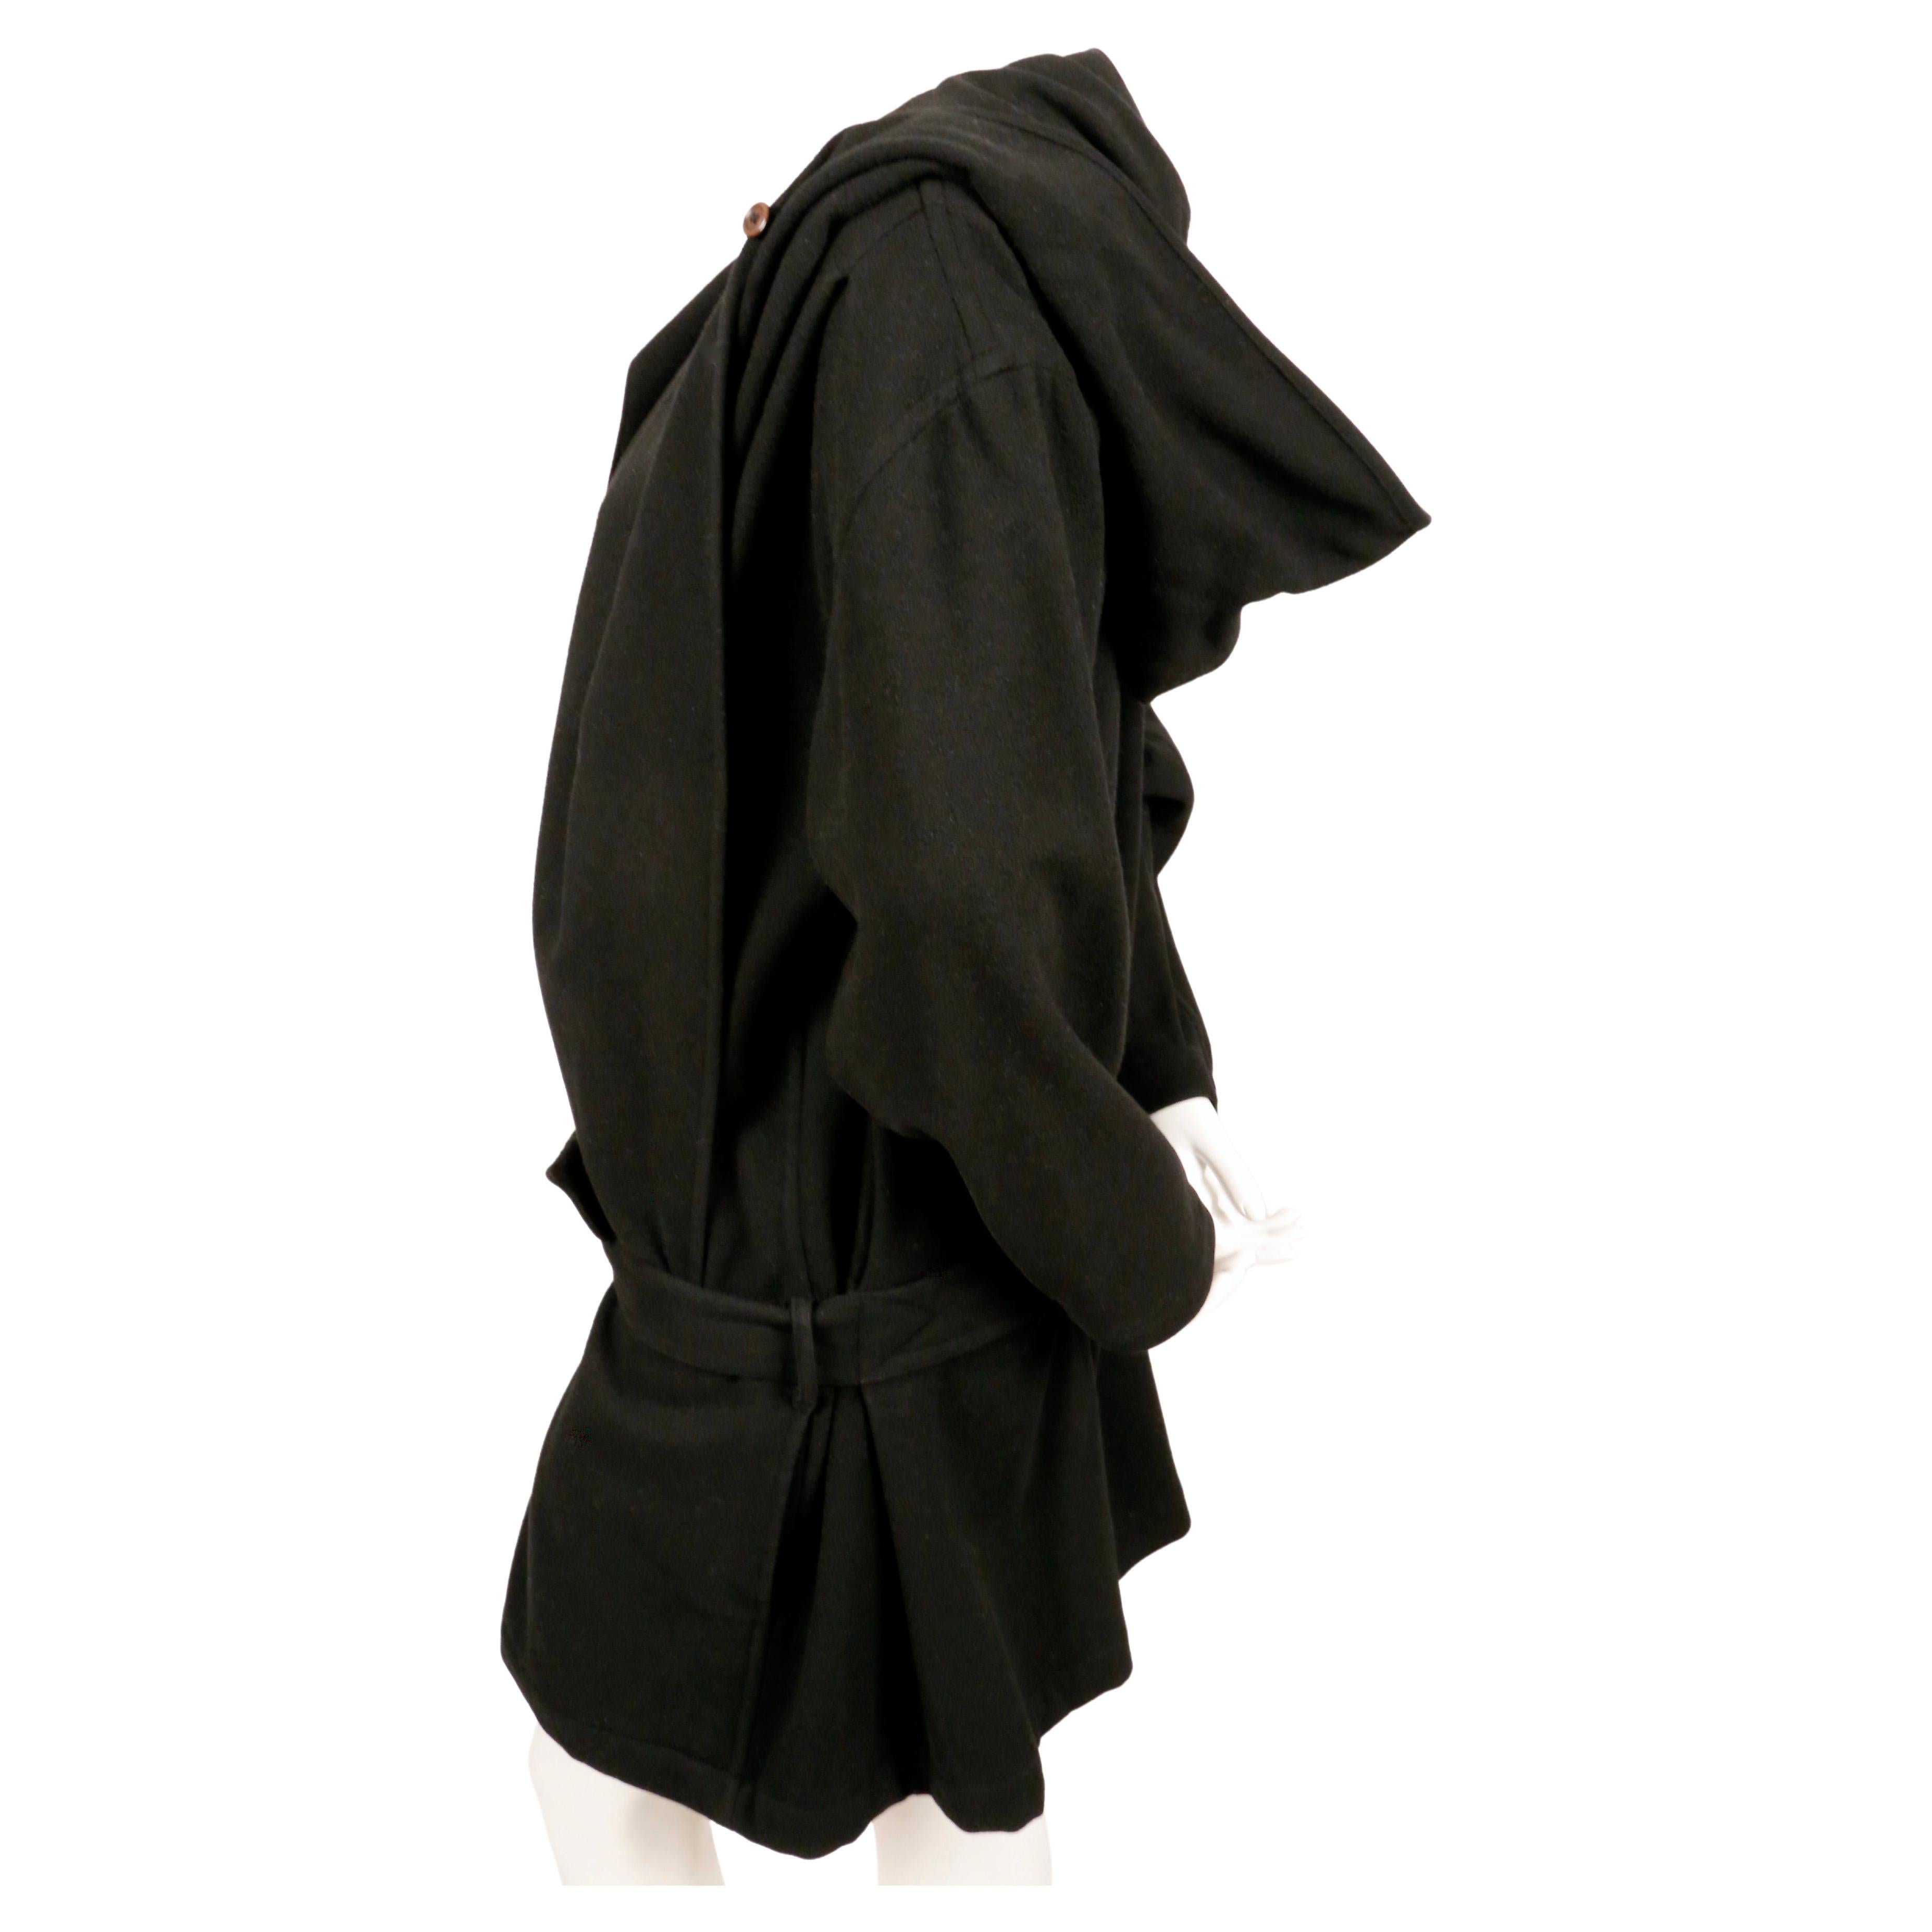 1981 ISSEY MIYAKE black wool draped wrap RUNWAY coat with hood In Good Condition For Sale In San Fransisco, CA